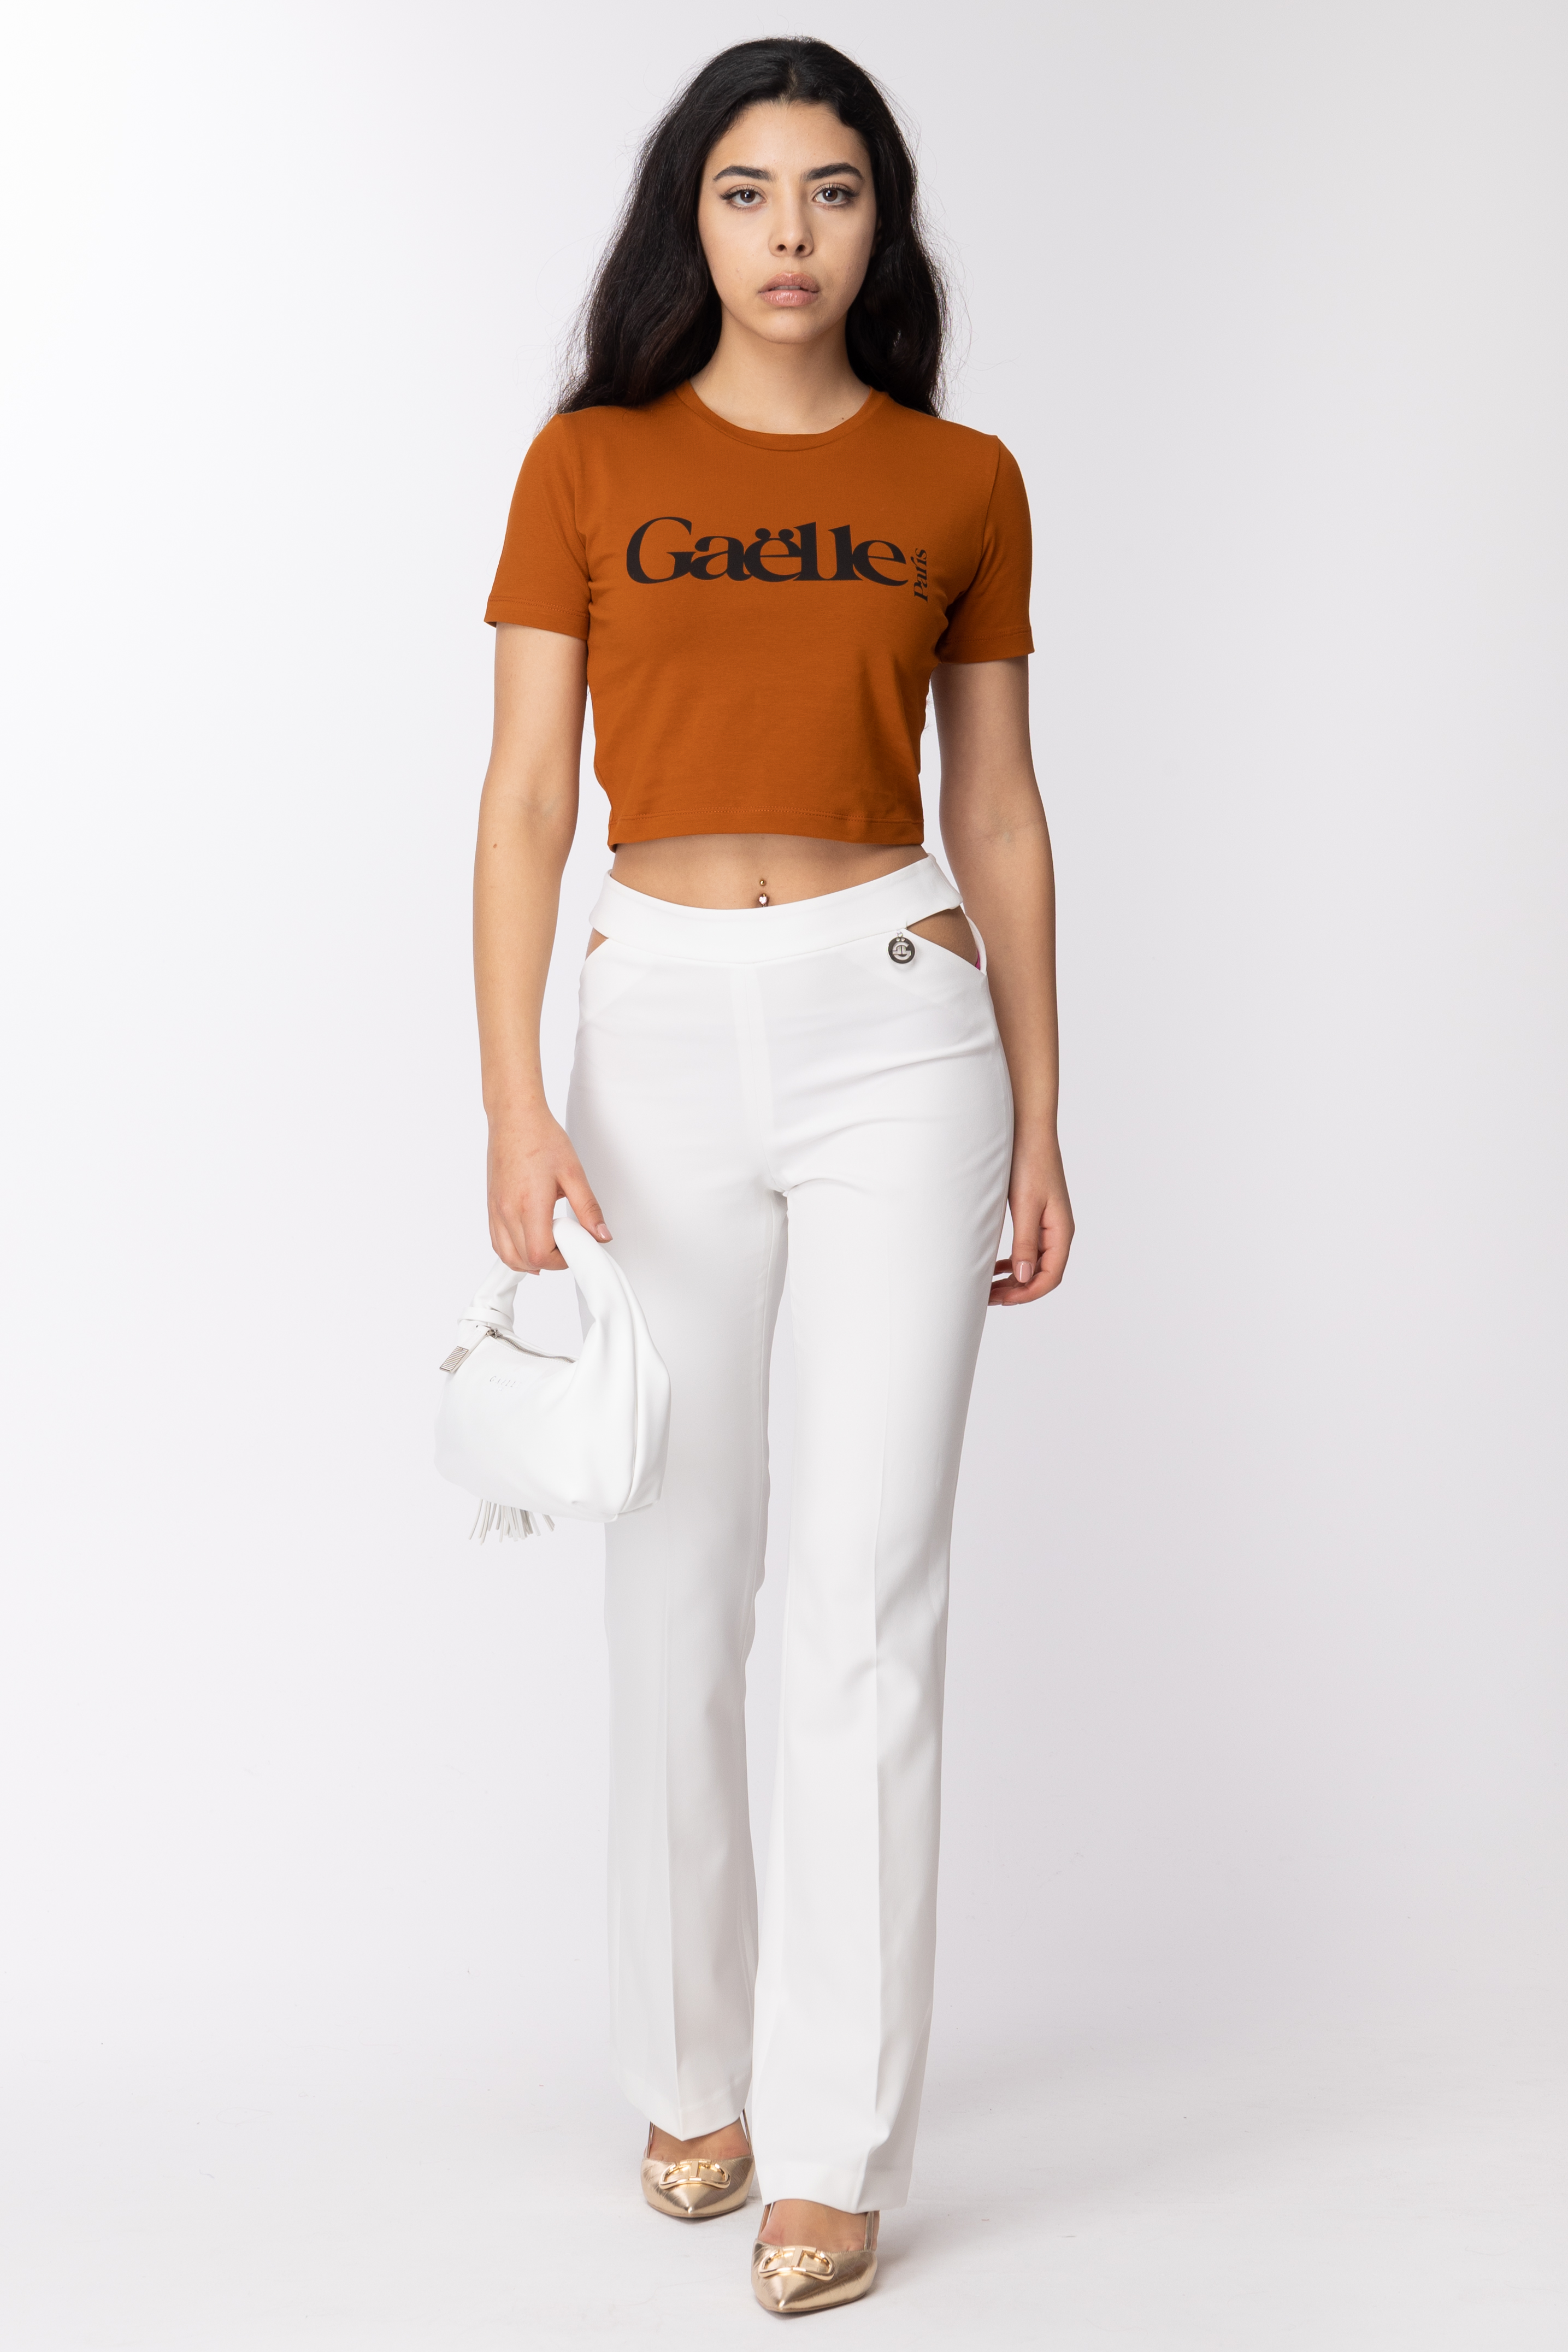 Preview: Gaelle Paris Cropped t-shirt with logo print MARRONE BRUCIATO